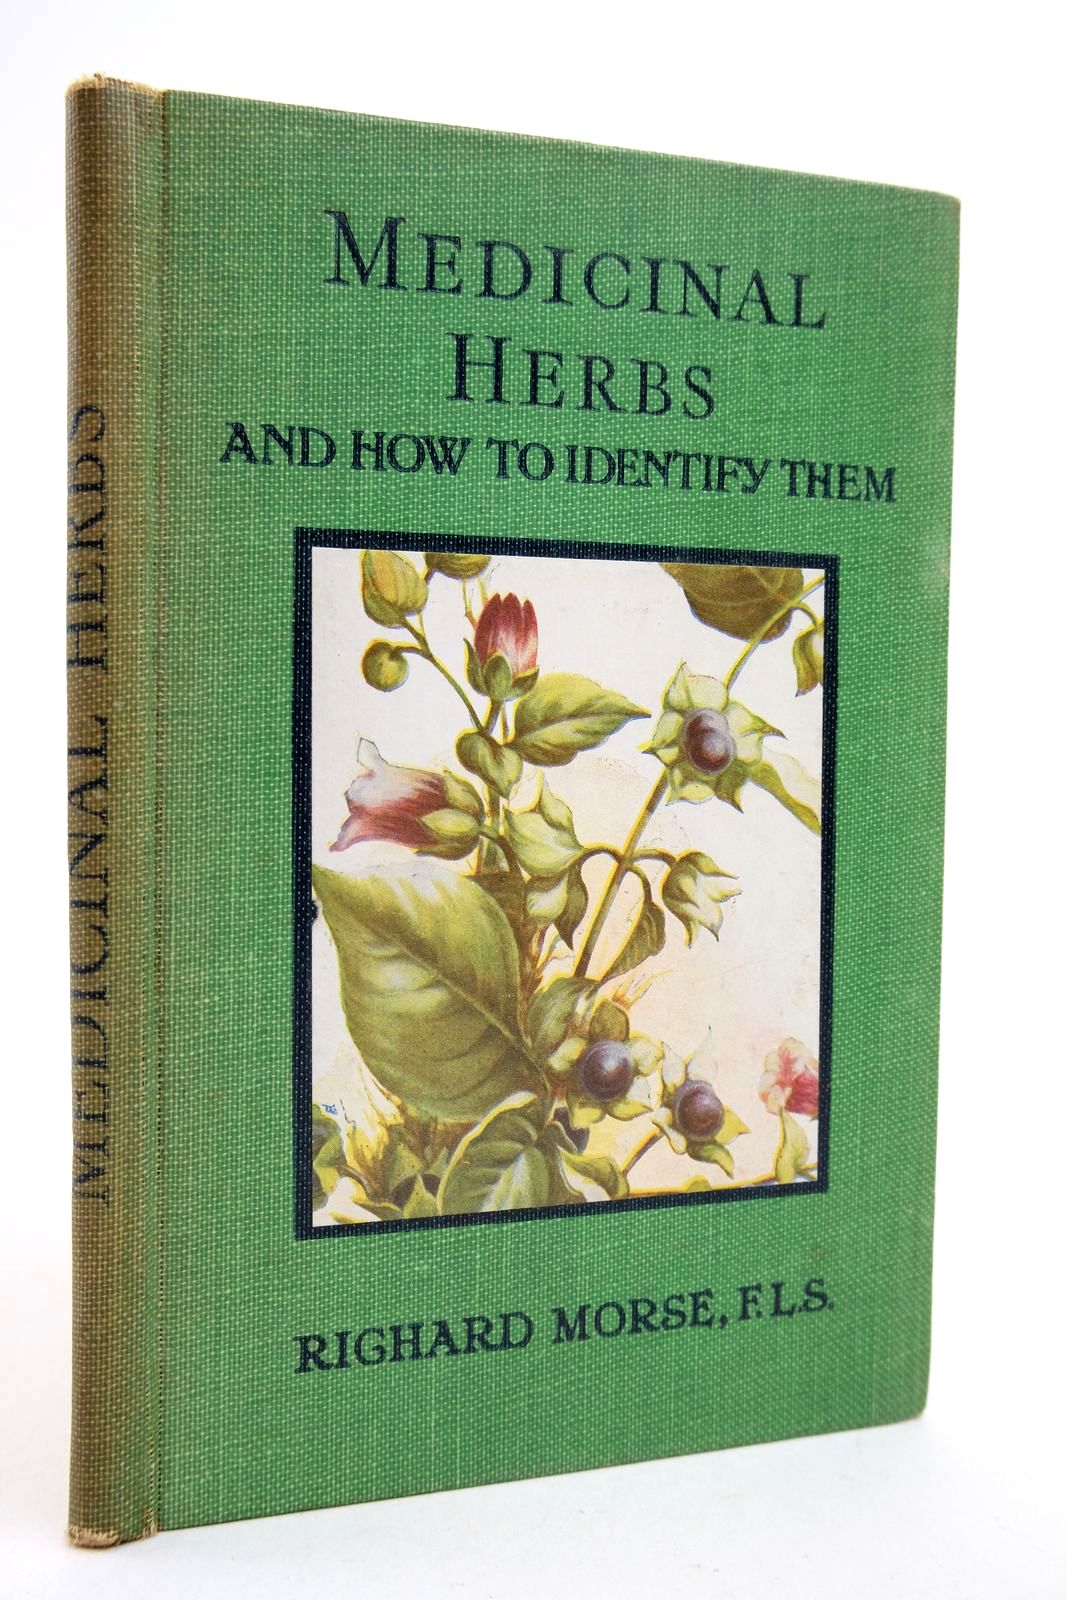 Photo of MEDICINAL HERBS AND HOW TO IDENTIFY THEM- Stock Number: 2140660